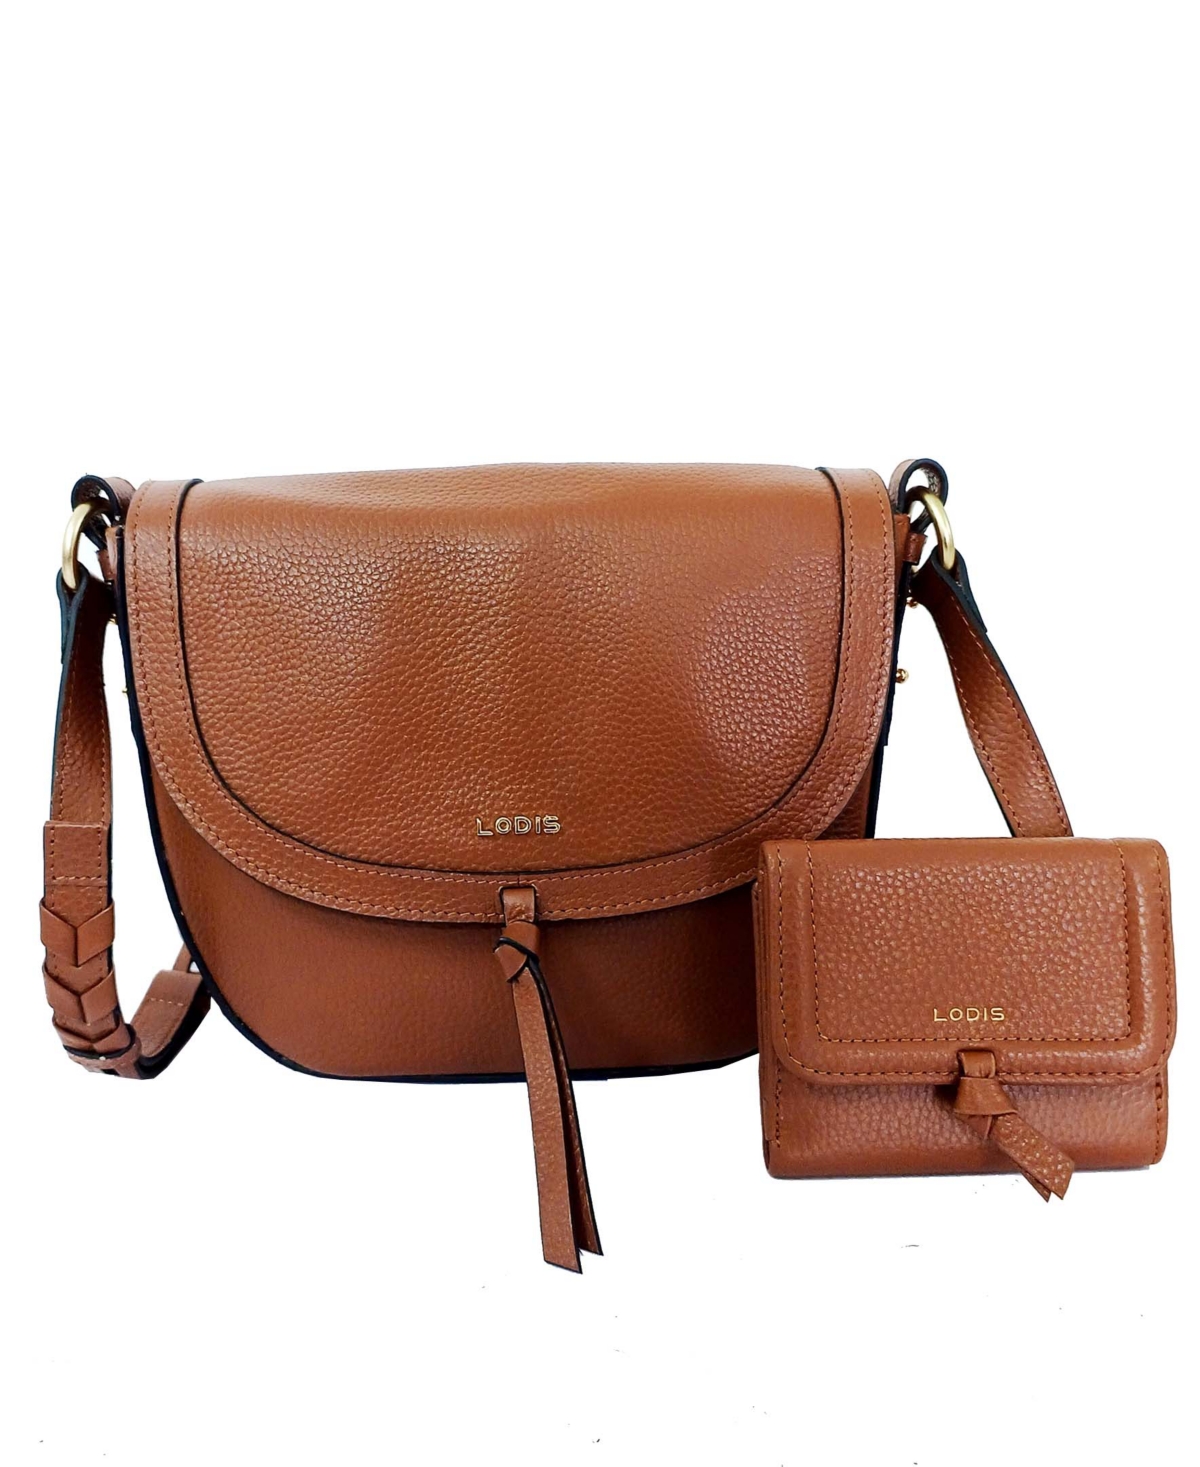 Lodis Women's Ellia Leather Crossbody Bag With Matching Wallet Set, 2 Pieces In Chestnut